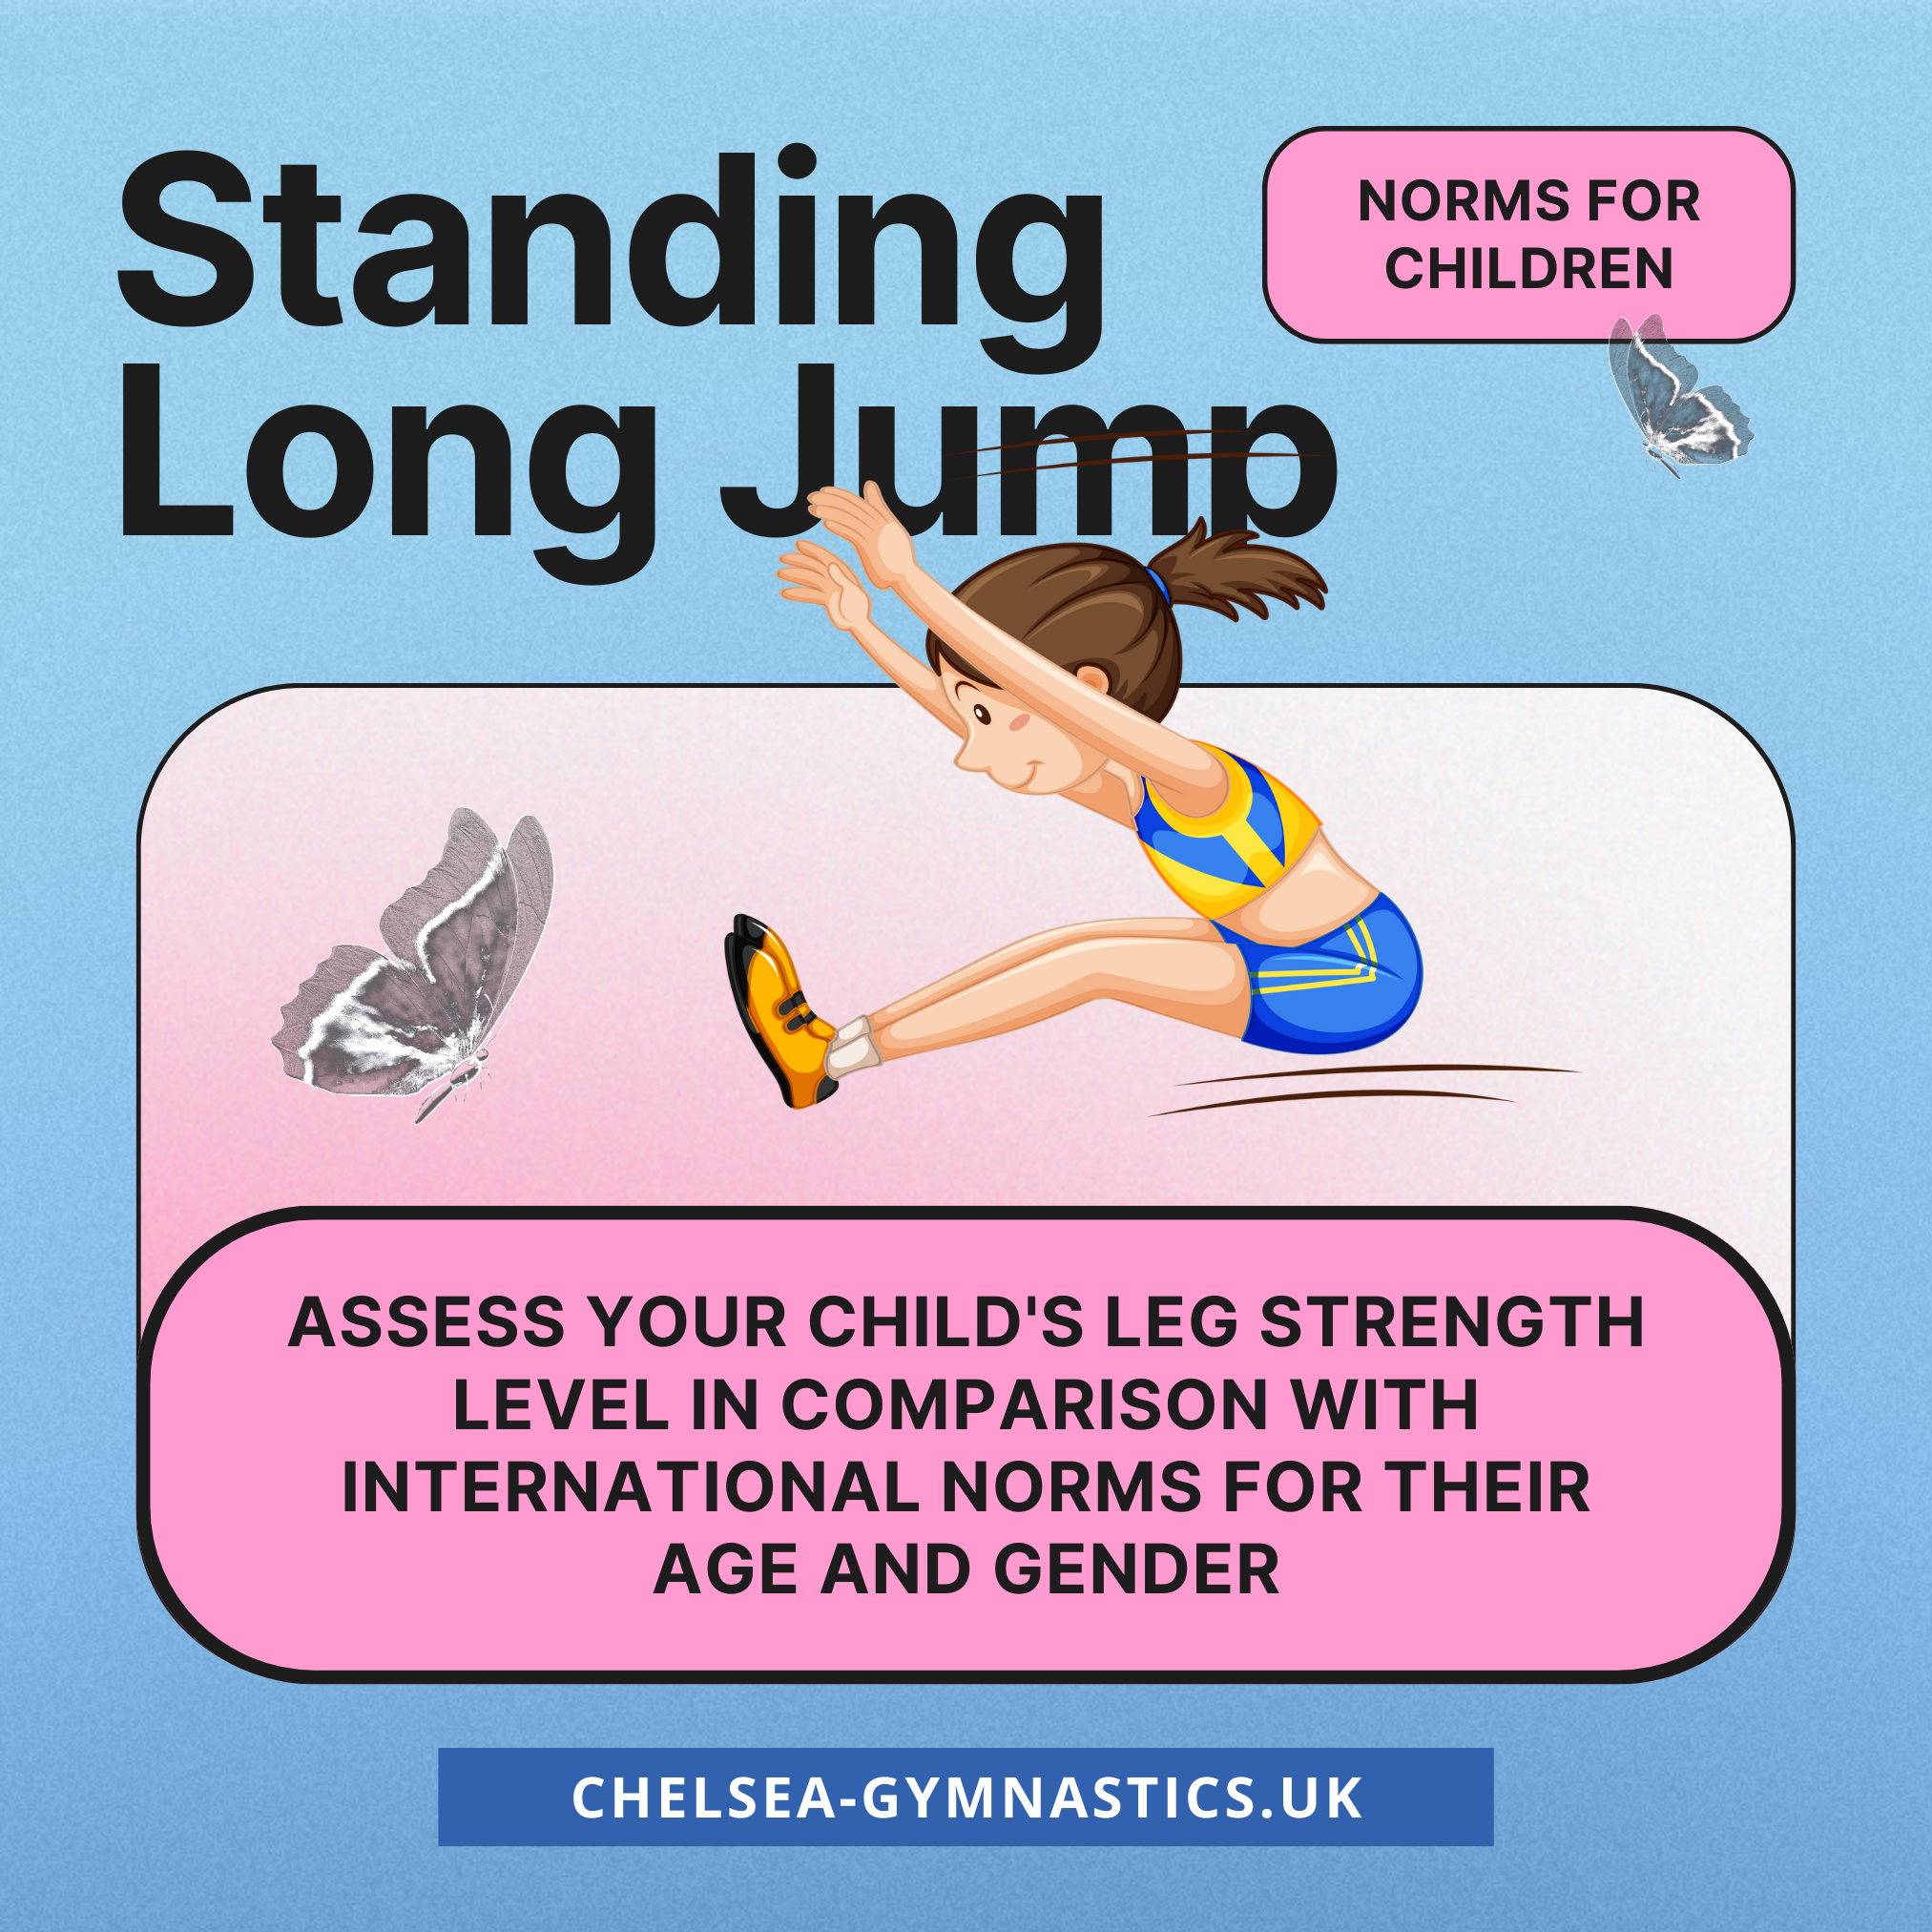 Norms for the Standing Long Jump Test